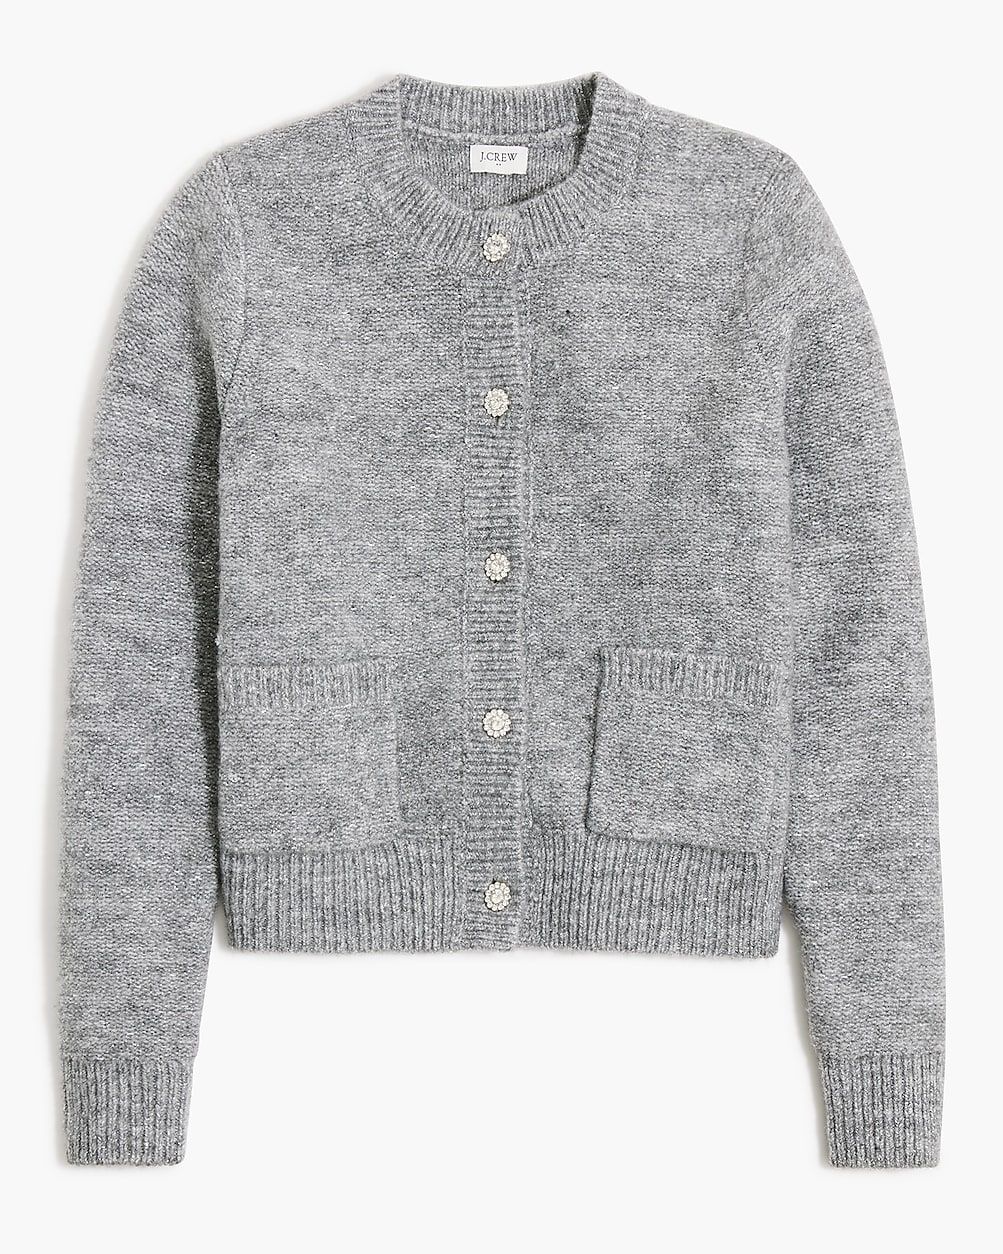 Shimmer lady cardigan sweater | J.Crew Factory